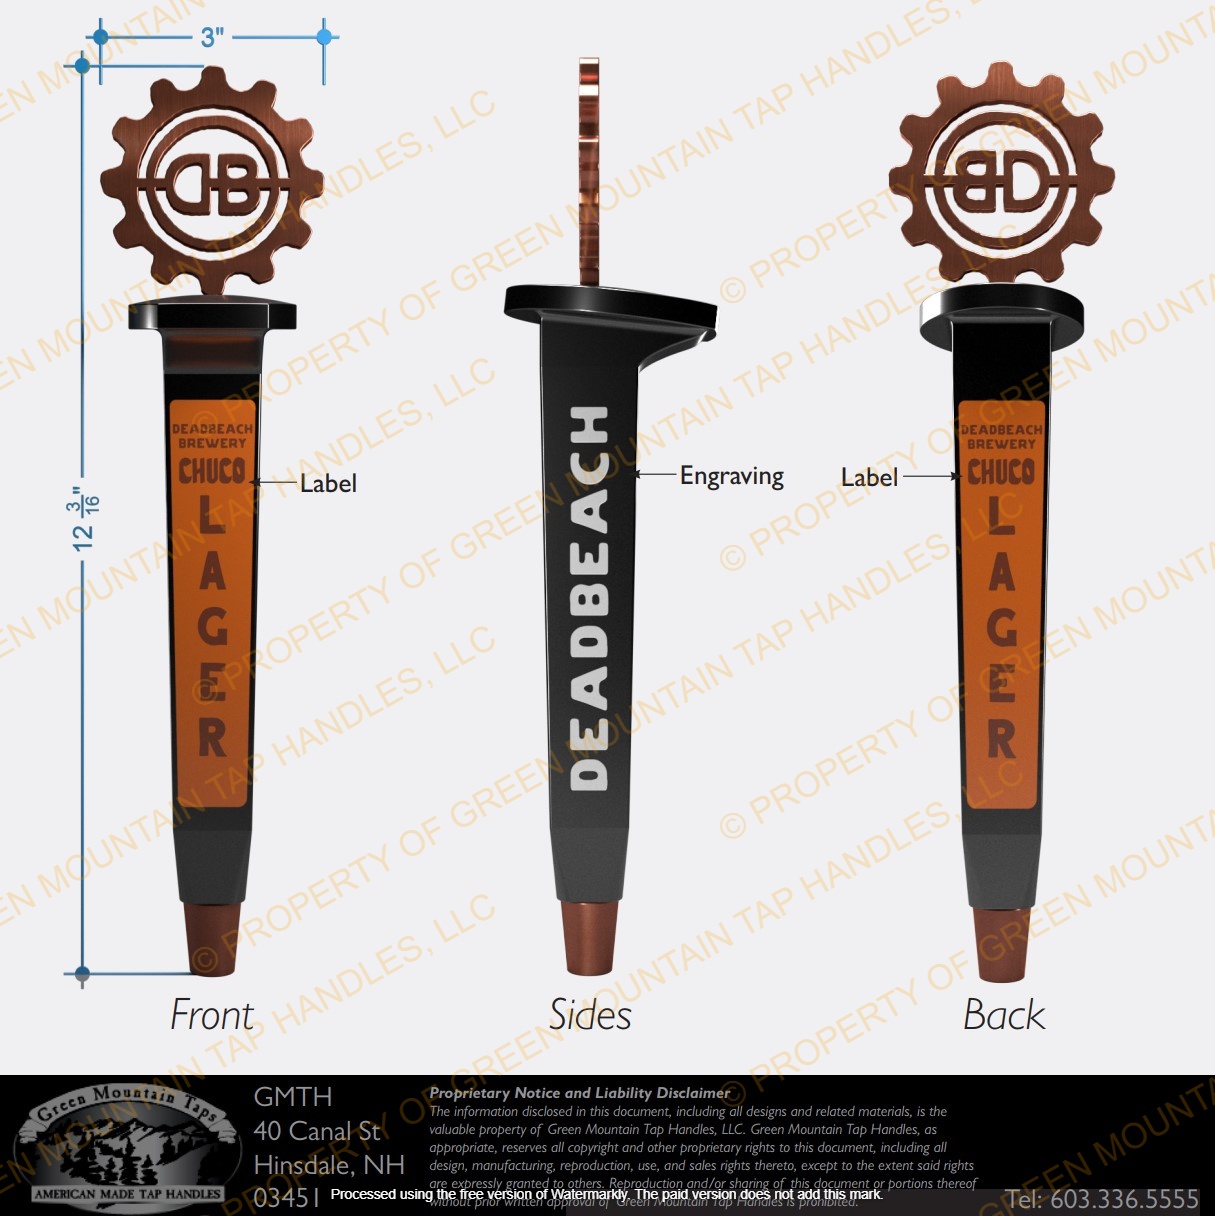 Tap Handle - Mockup.
           * * * Legal Disclaimer: The information disclosed in this document, including all designs and related materials, is the property of Green Mountain Tap Handles, LLC.
           Green Mountain Tap Handles reserves all copyright and other proprietary rights to this document, including but not limited to, design, manufacturing, reproduction, use, and sales rights thereto.
           Reproduction and/or sharing of this document or portions thereof without prior written approval of Green Mountain Tap Handles is prohibited.